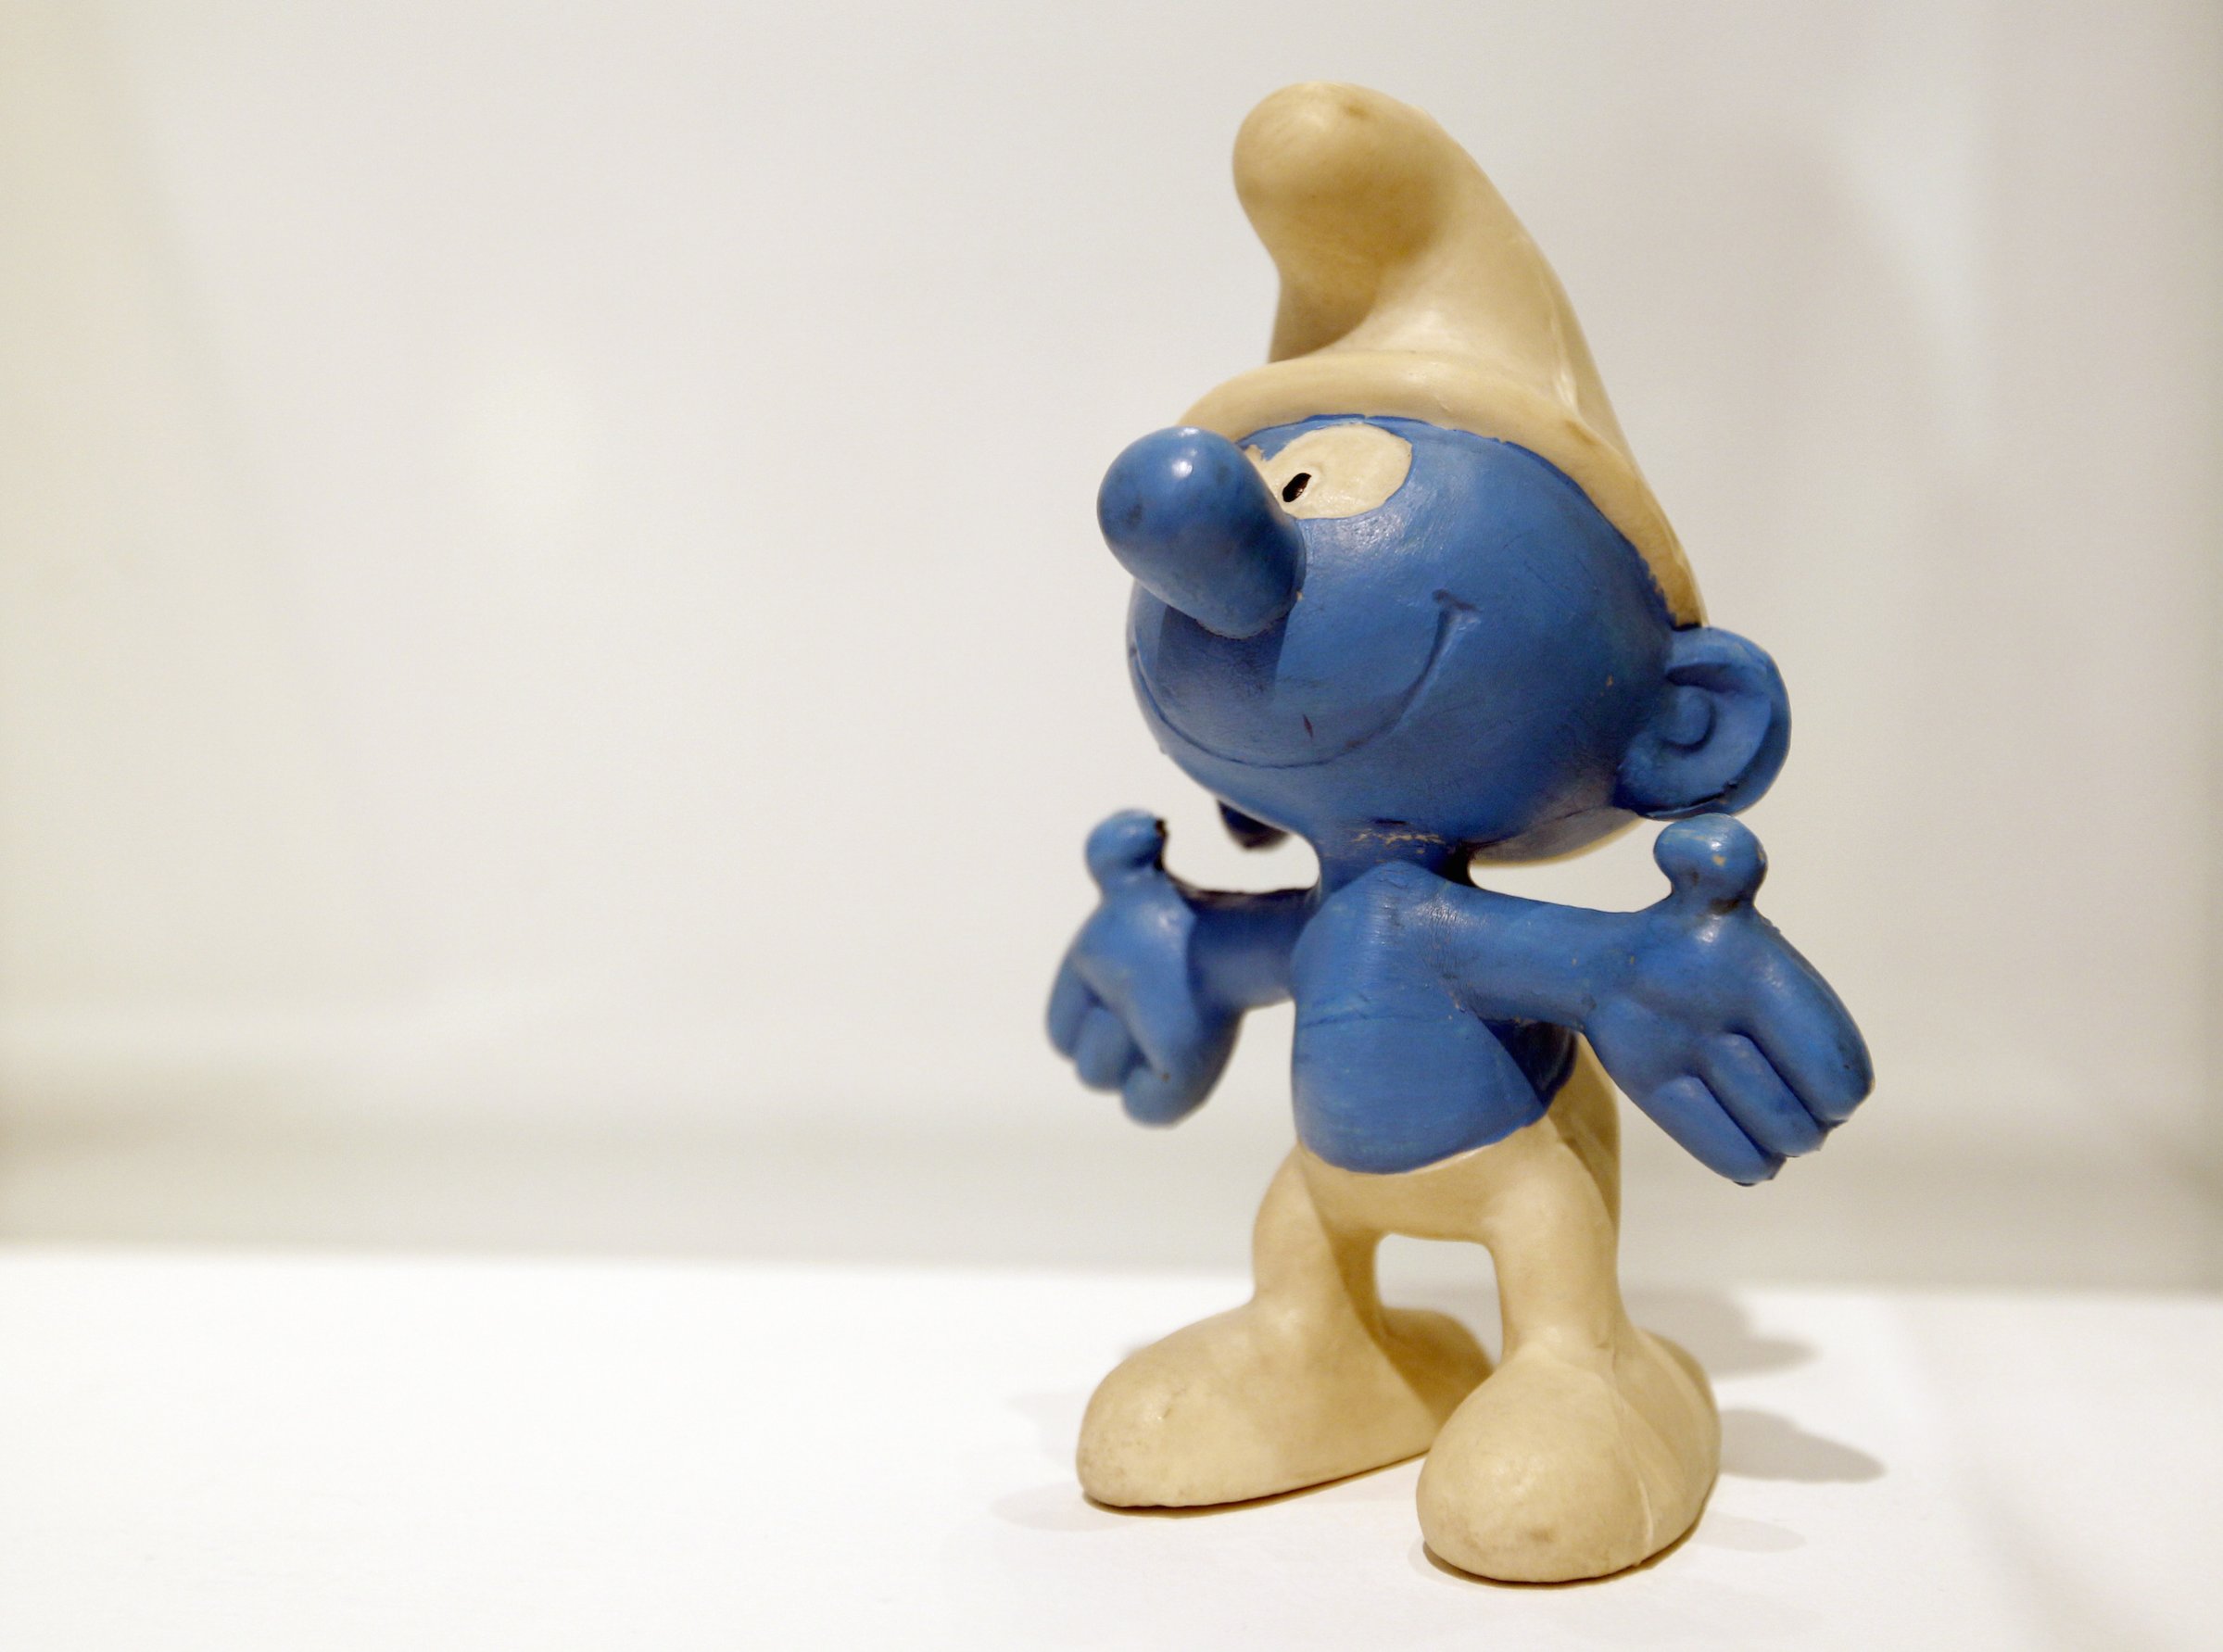 A Smurf (Schtroumpf in French) is displayed